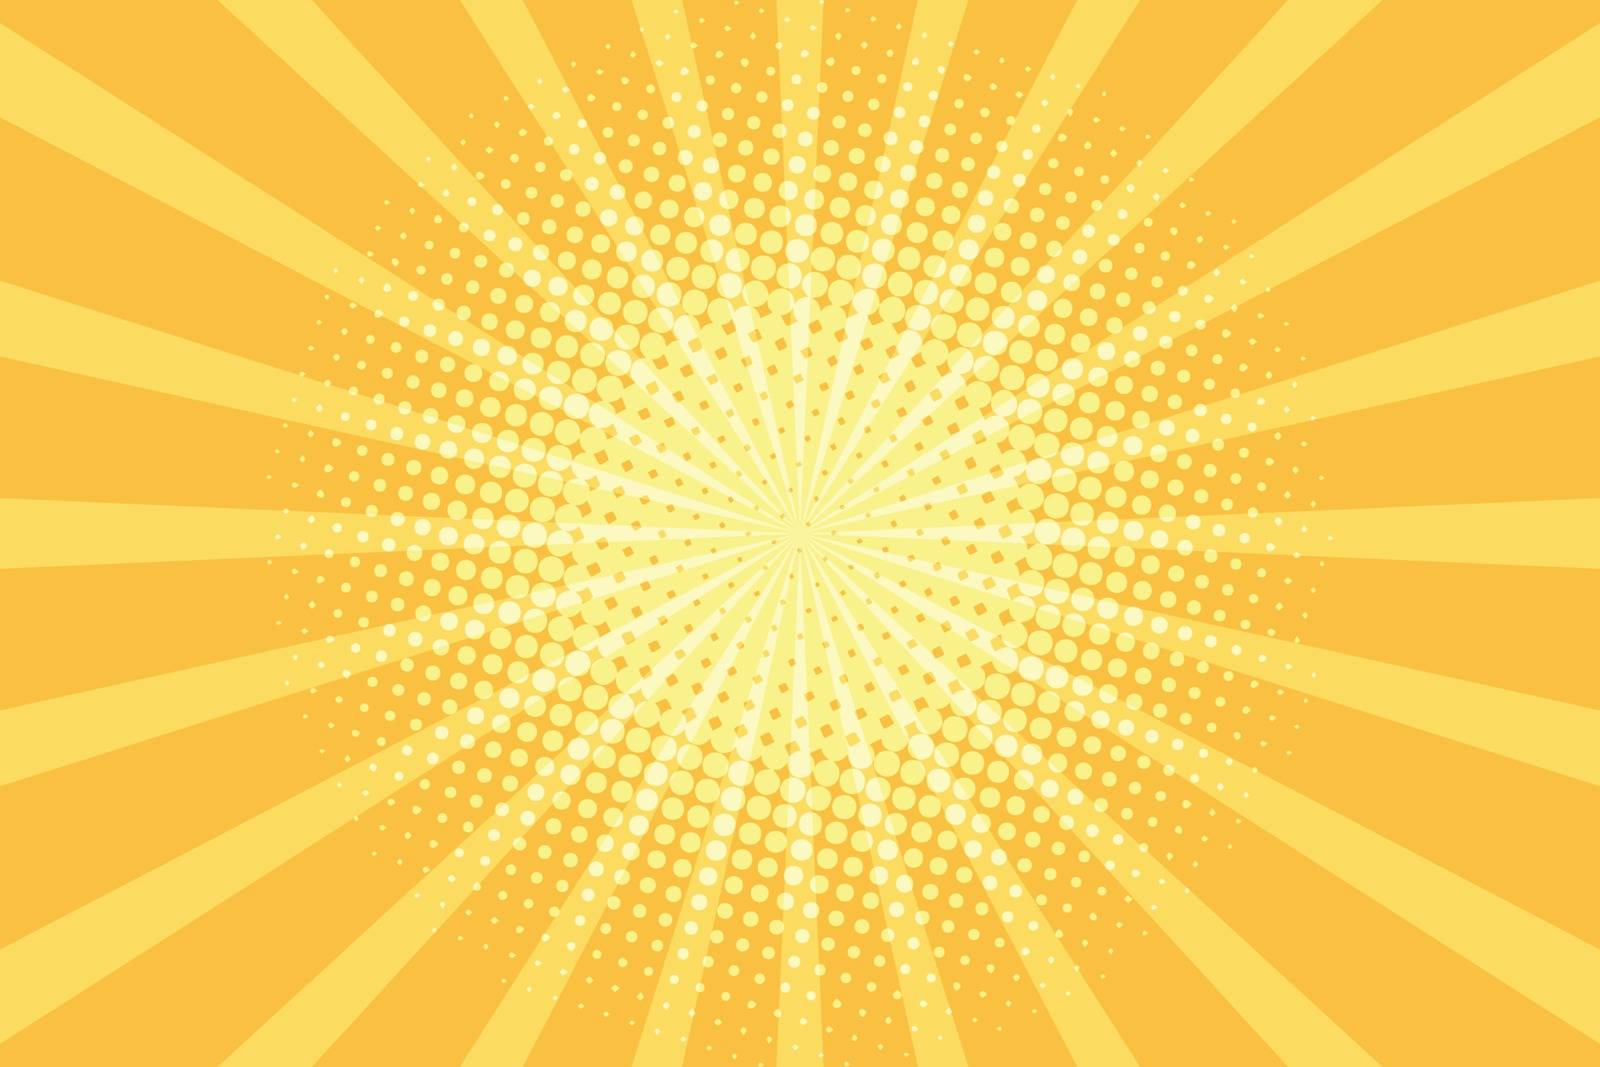 yellow rays pop art background Stock Image | VectorGrove - Royalty Free  Vector Images with commercial license